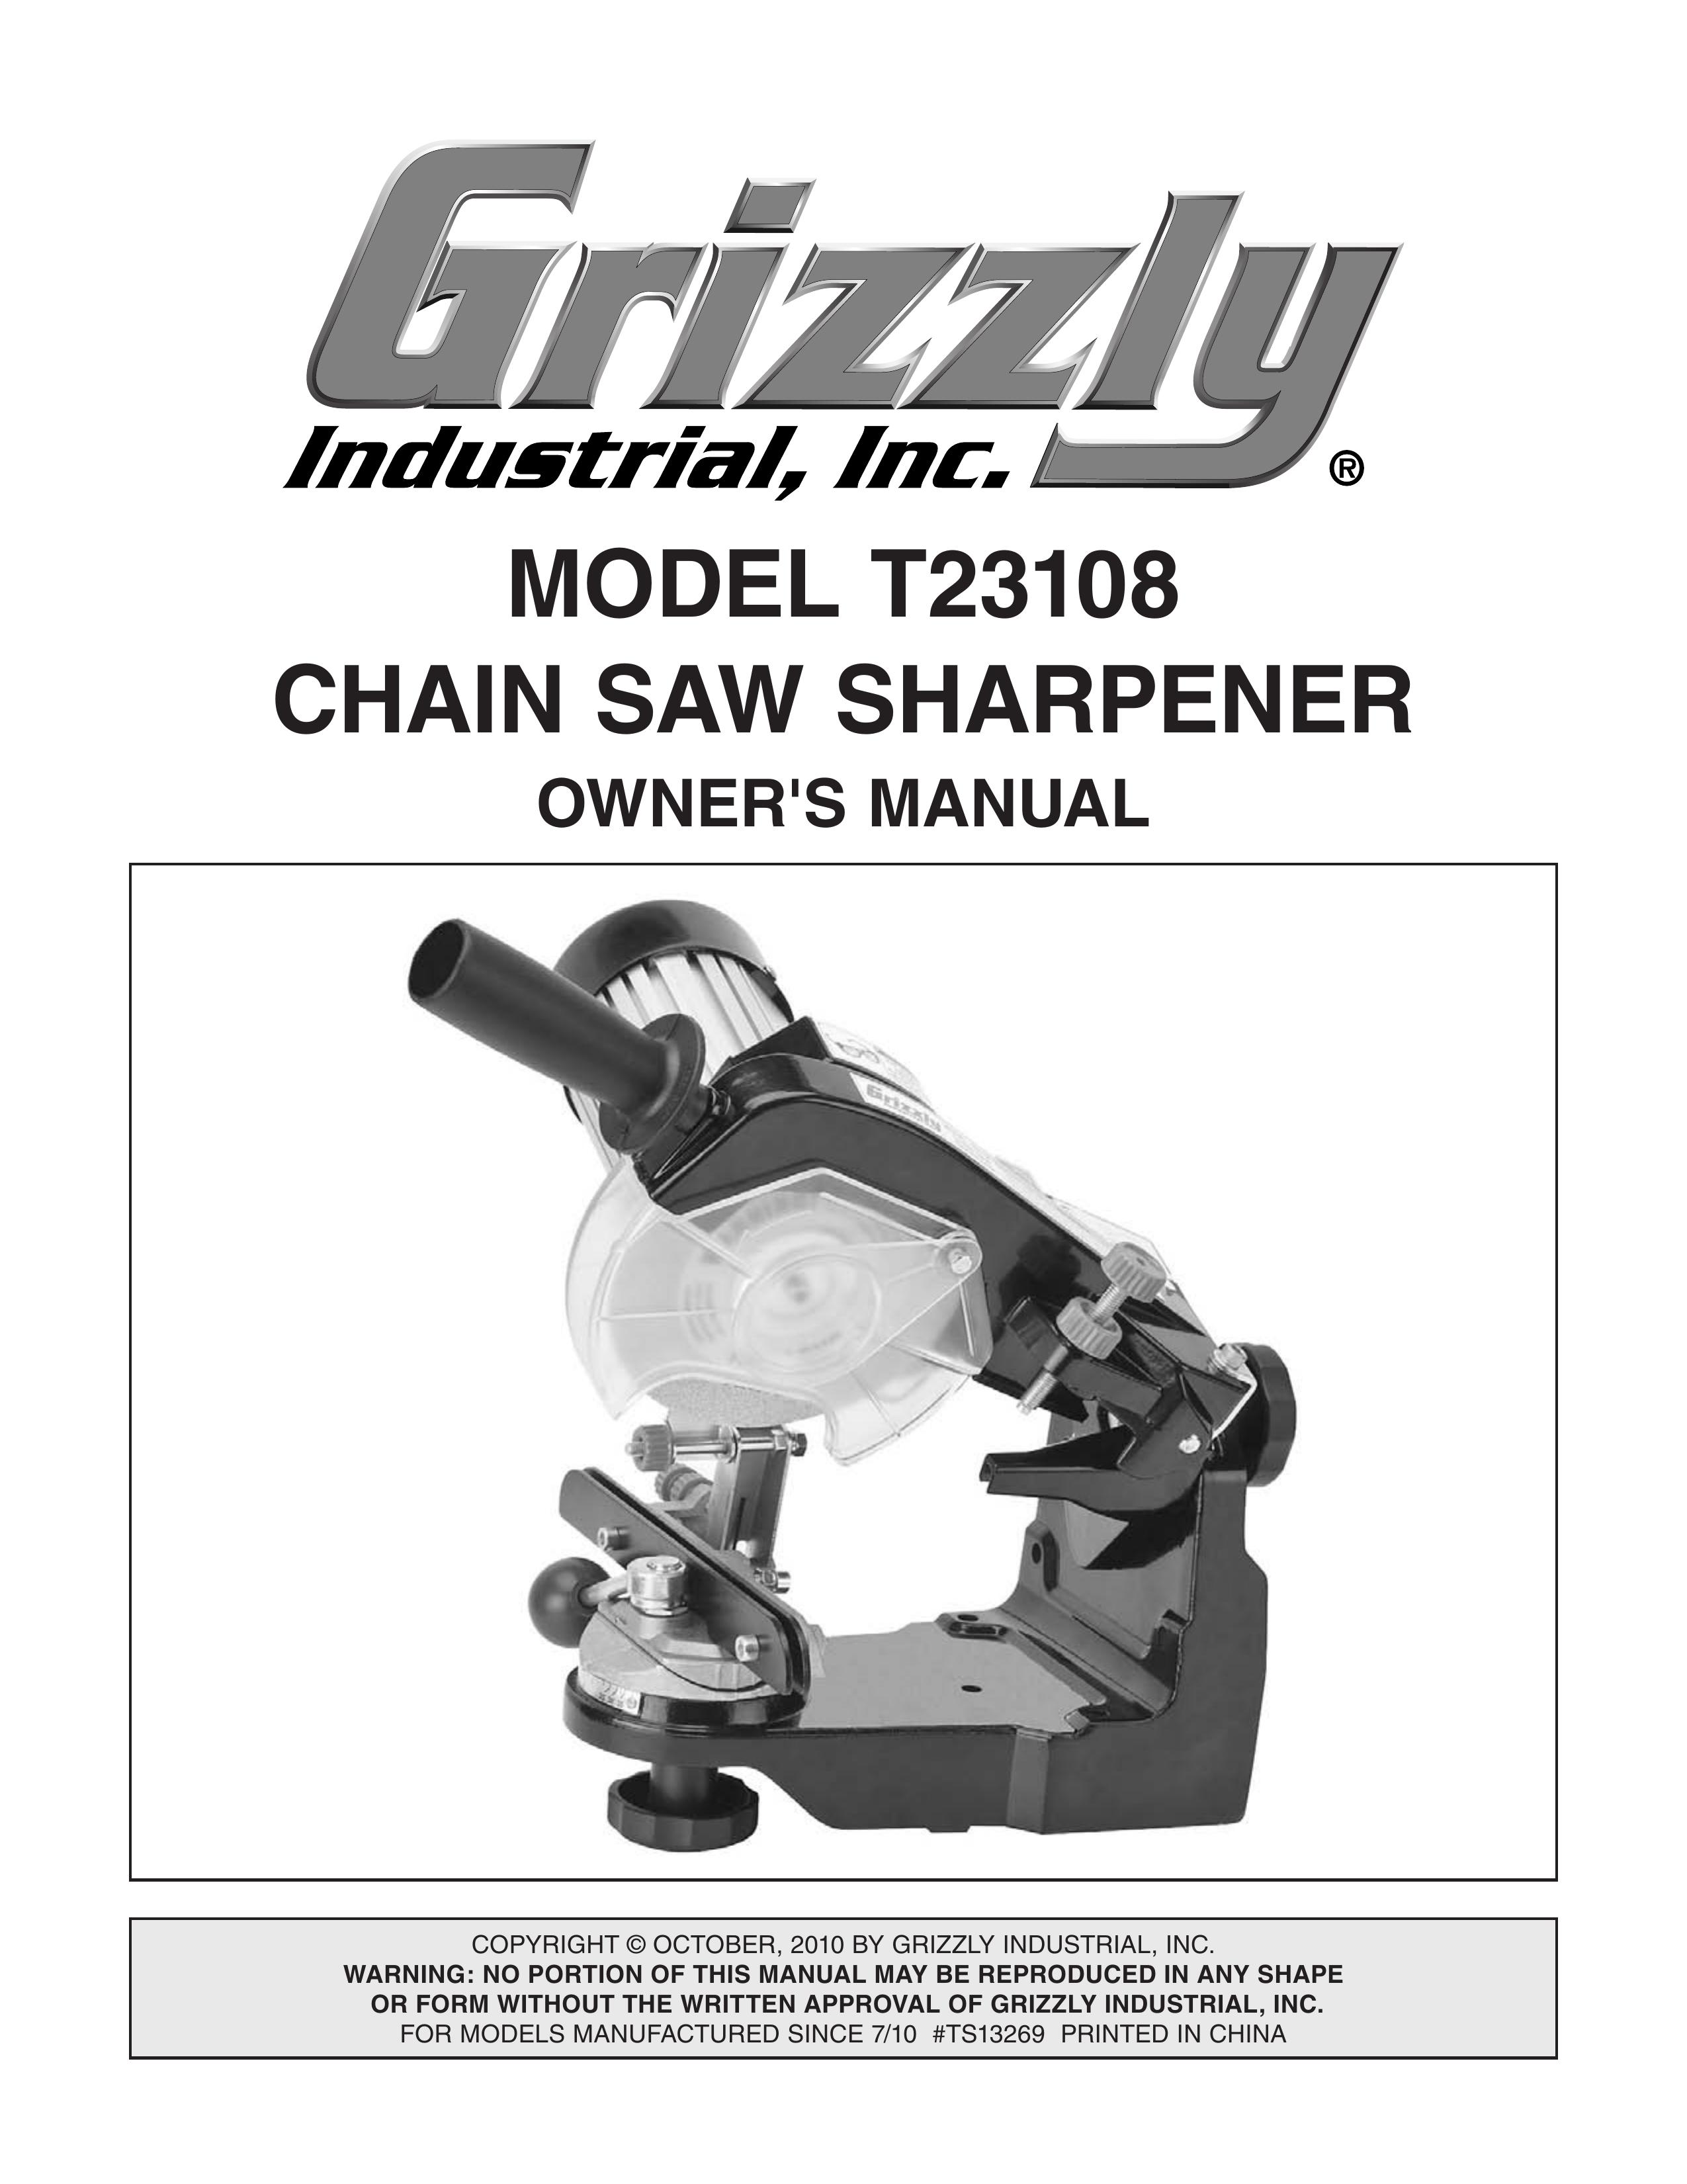 Grizzly T23108 Chainsaw Sharpener User Manual